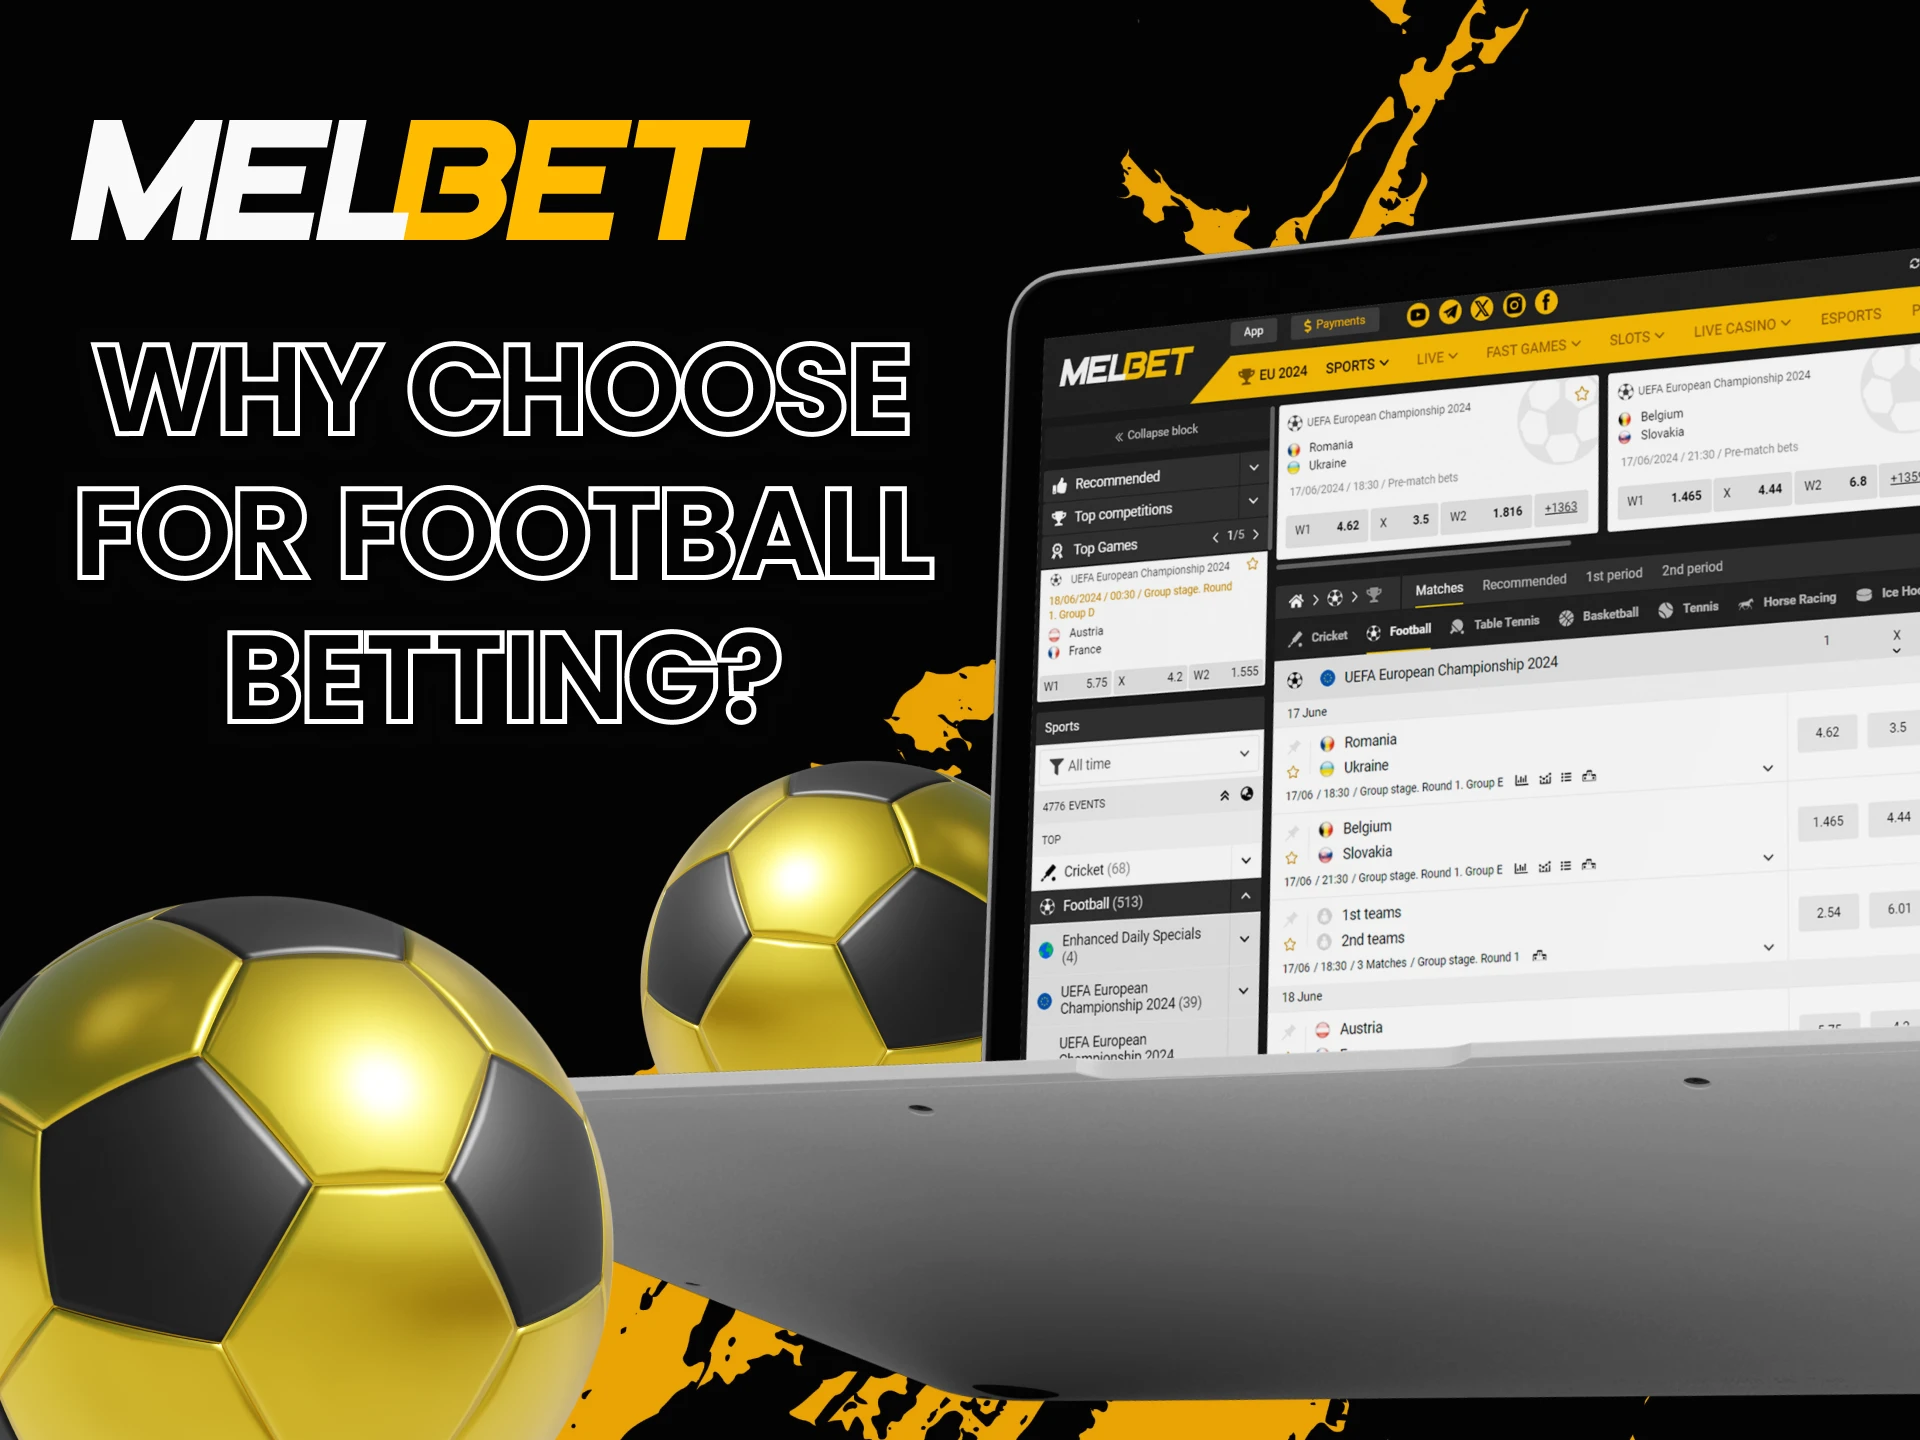 Melbet offers high odds and the opportunity to bet on football events in real time.